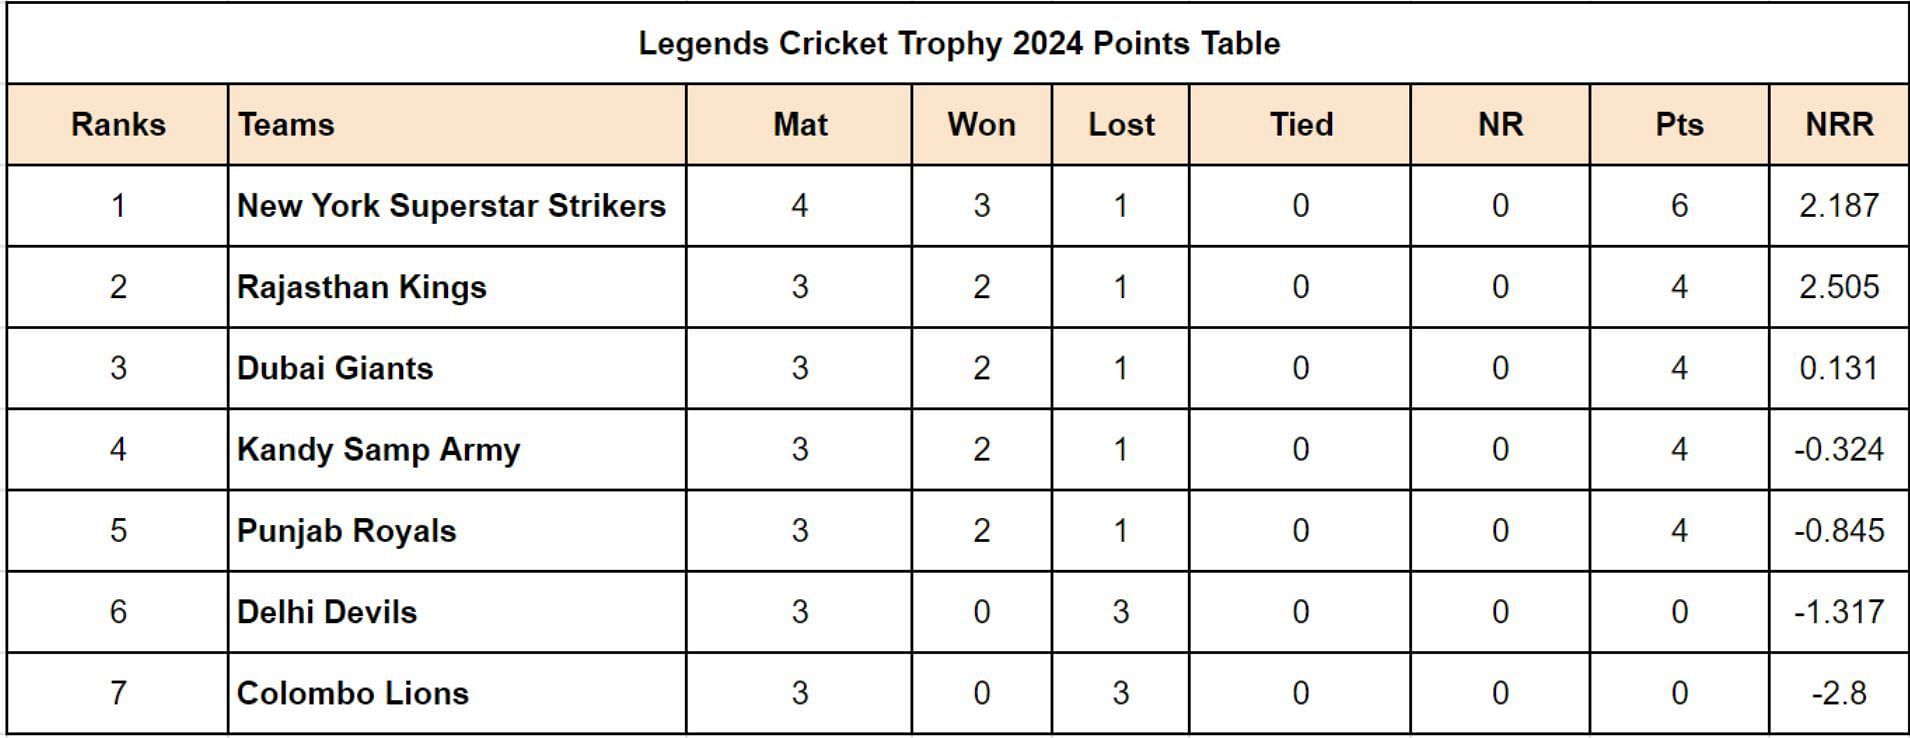 Legends Cricket Trophy 2024 Points Table Updated after Match 11